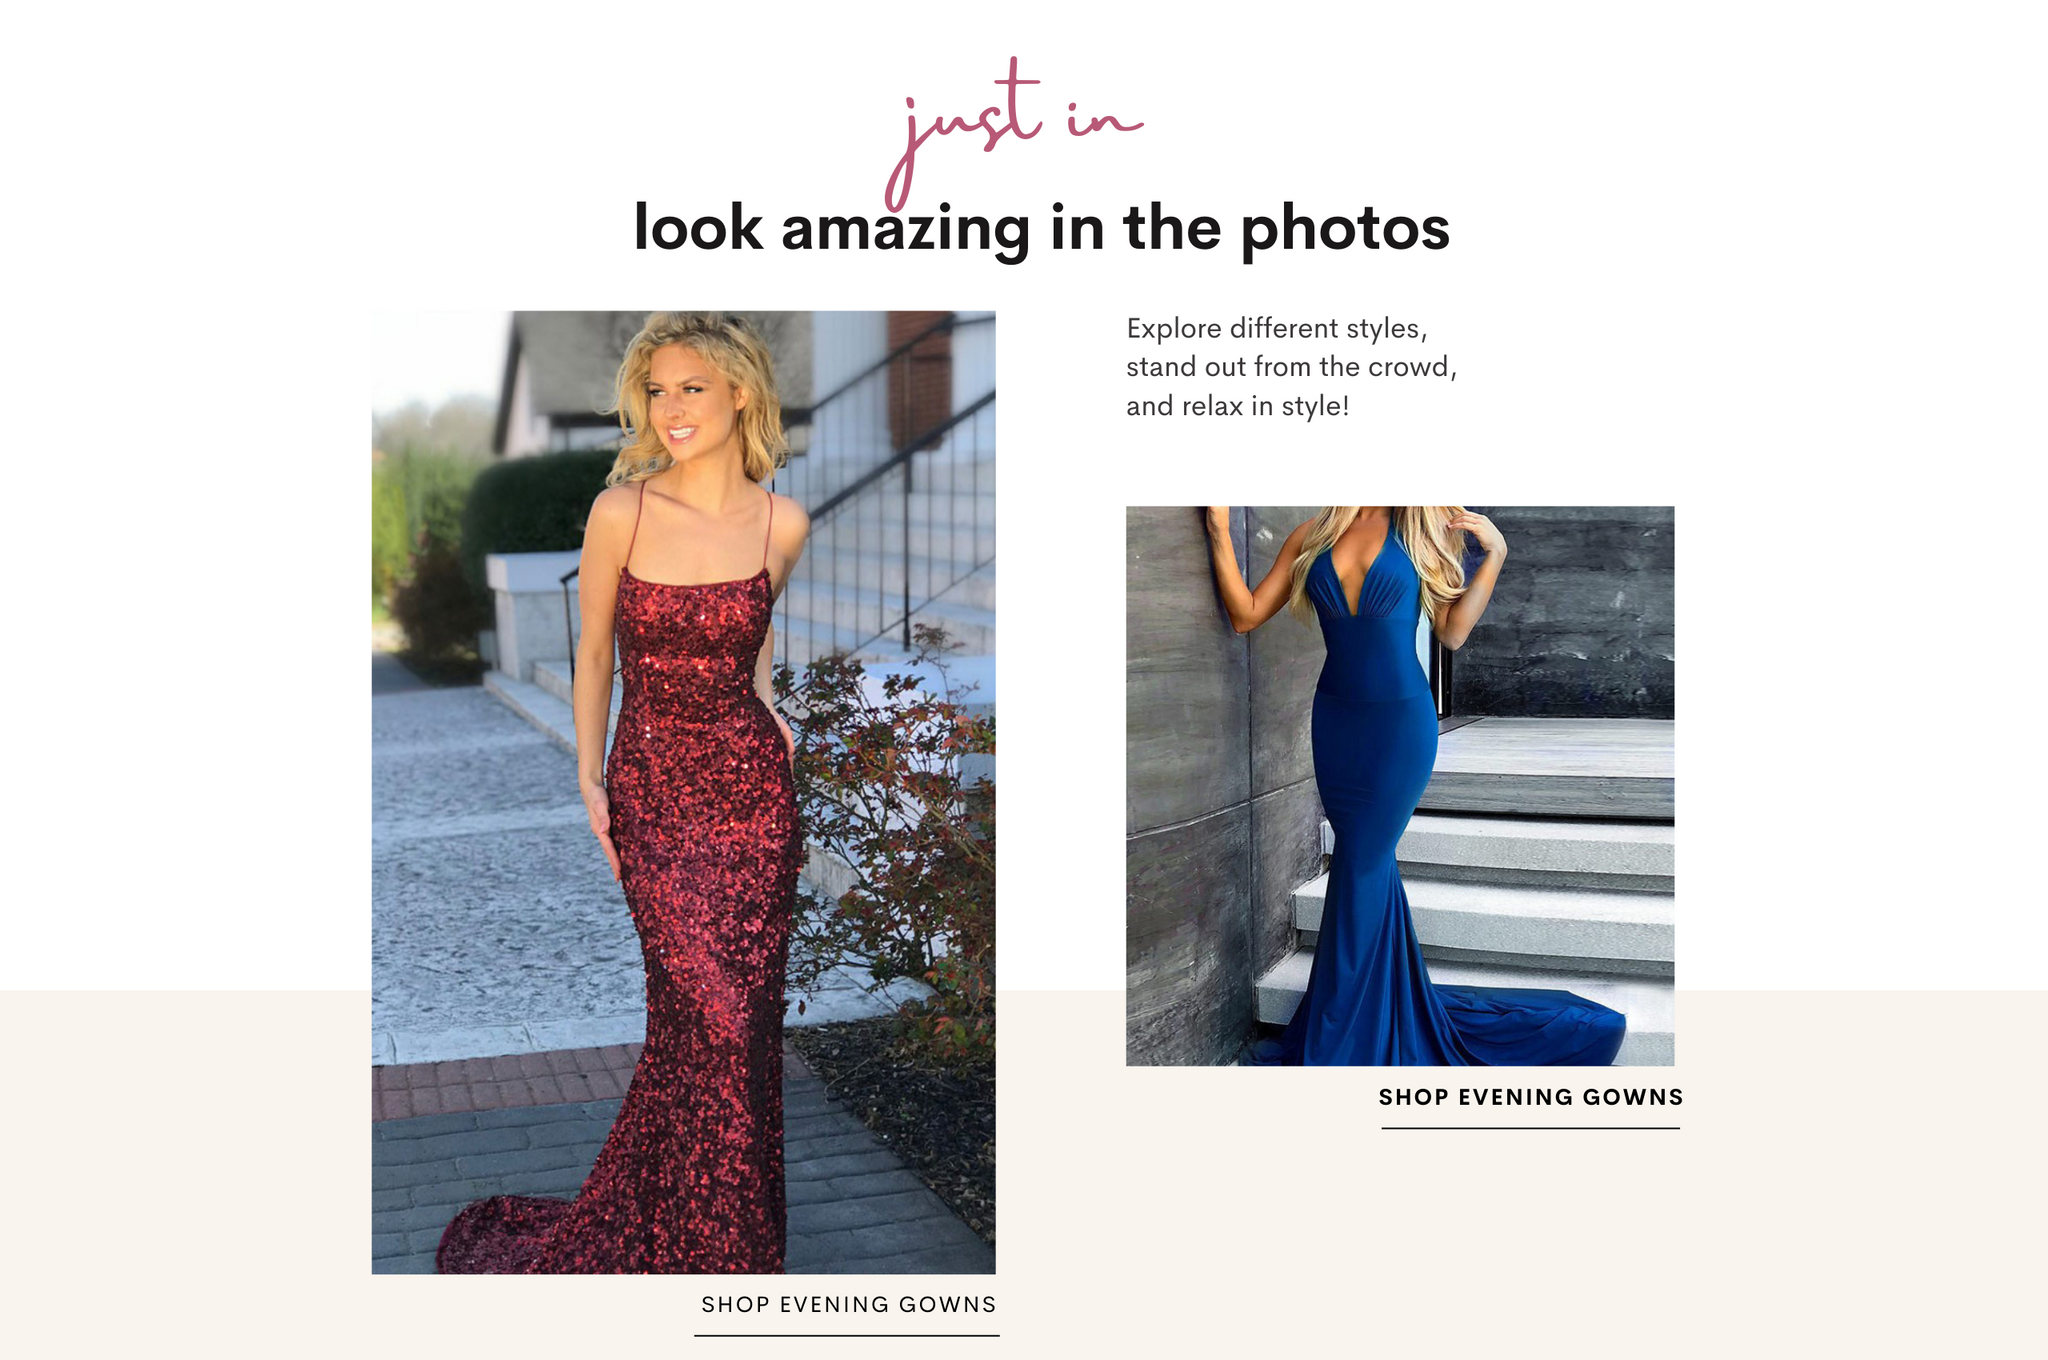 Look amazing in the photos, explore different styles, stnad out from the crowd, and relax in style! SHOP EVENING GOWNS.